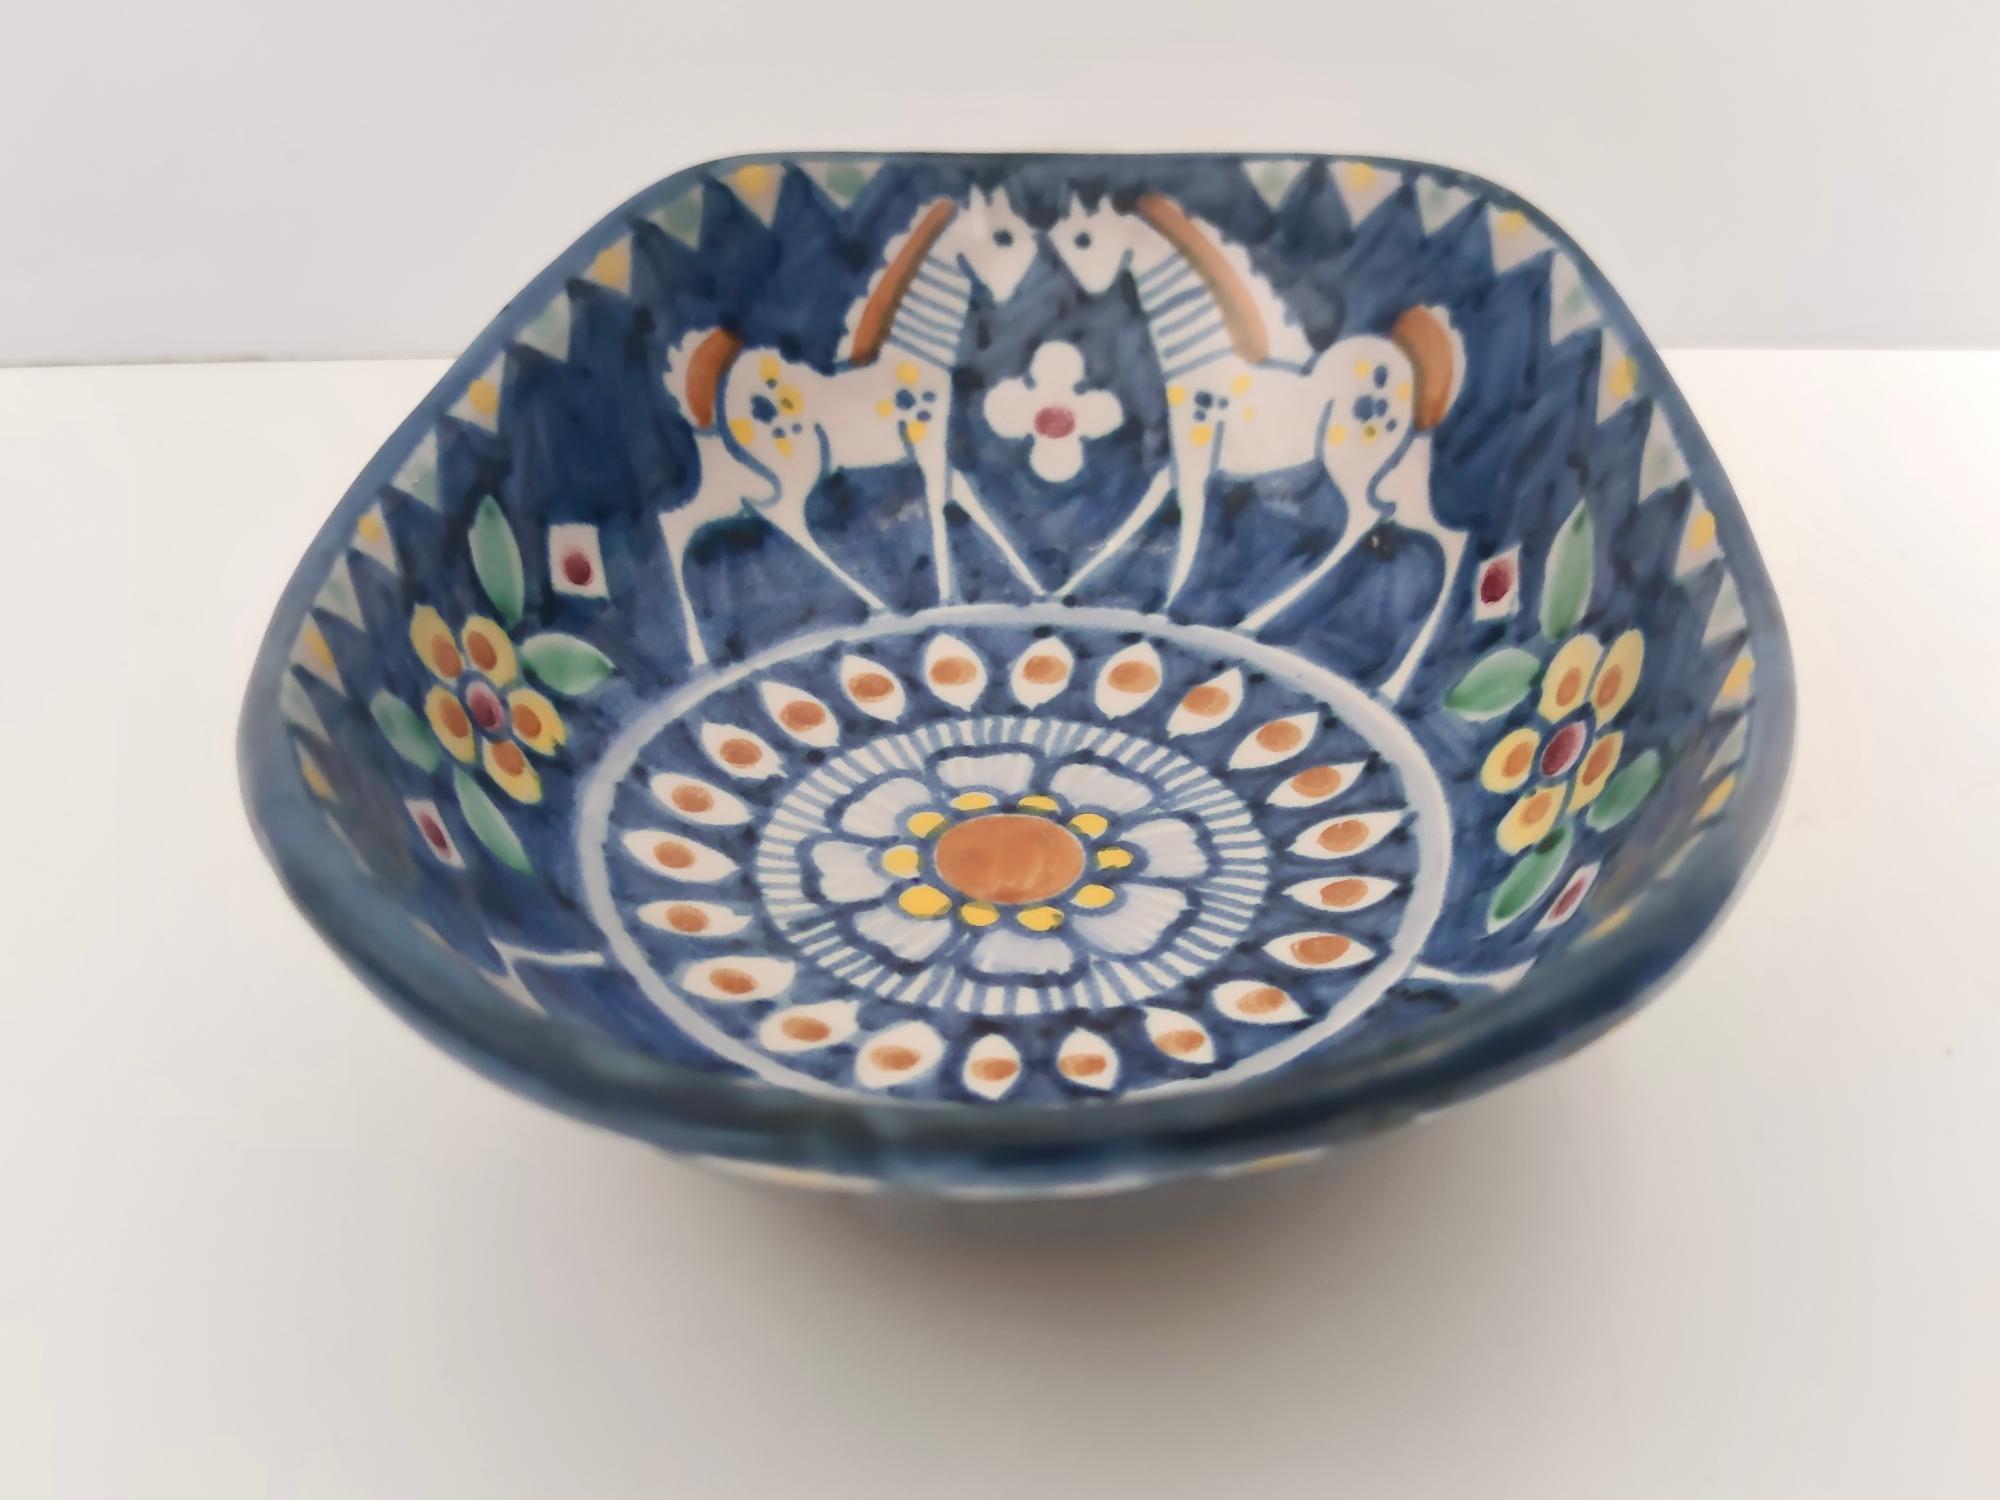 Vintage Handmade and Hand Painted Ceramic Bowl or Centerpiece, Italy For Sale 1